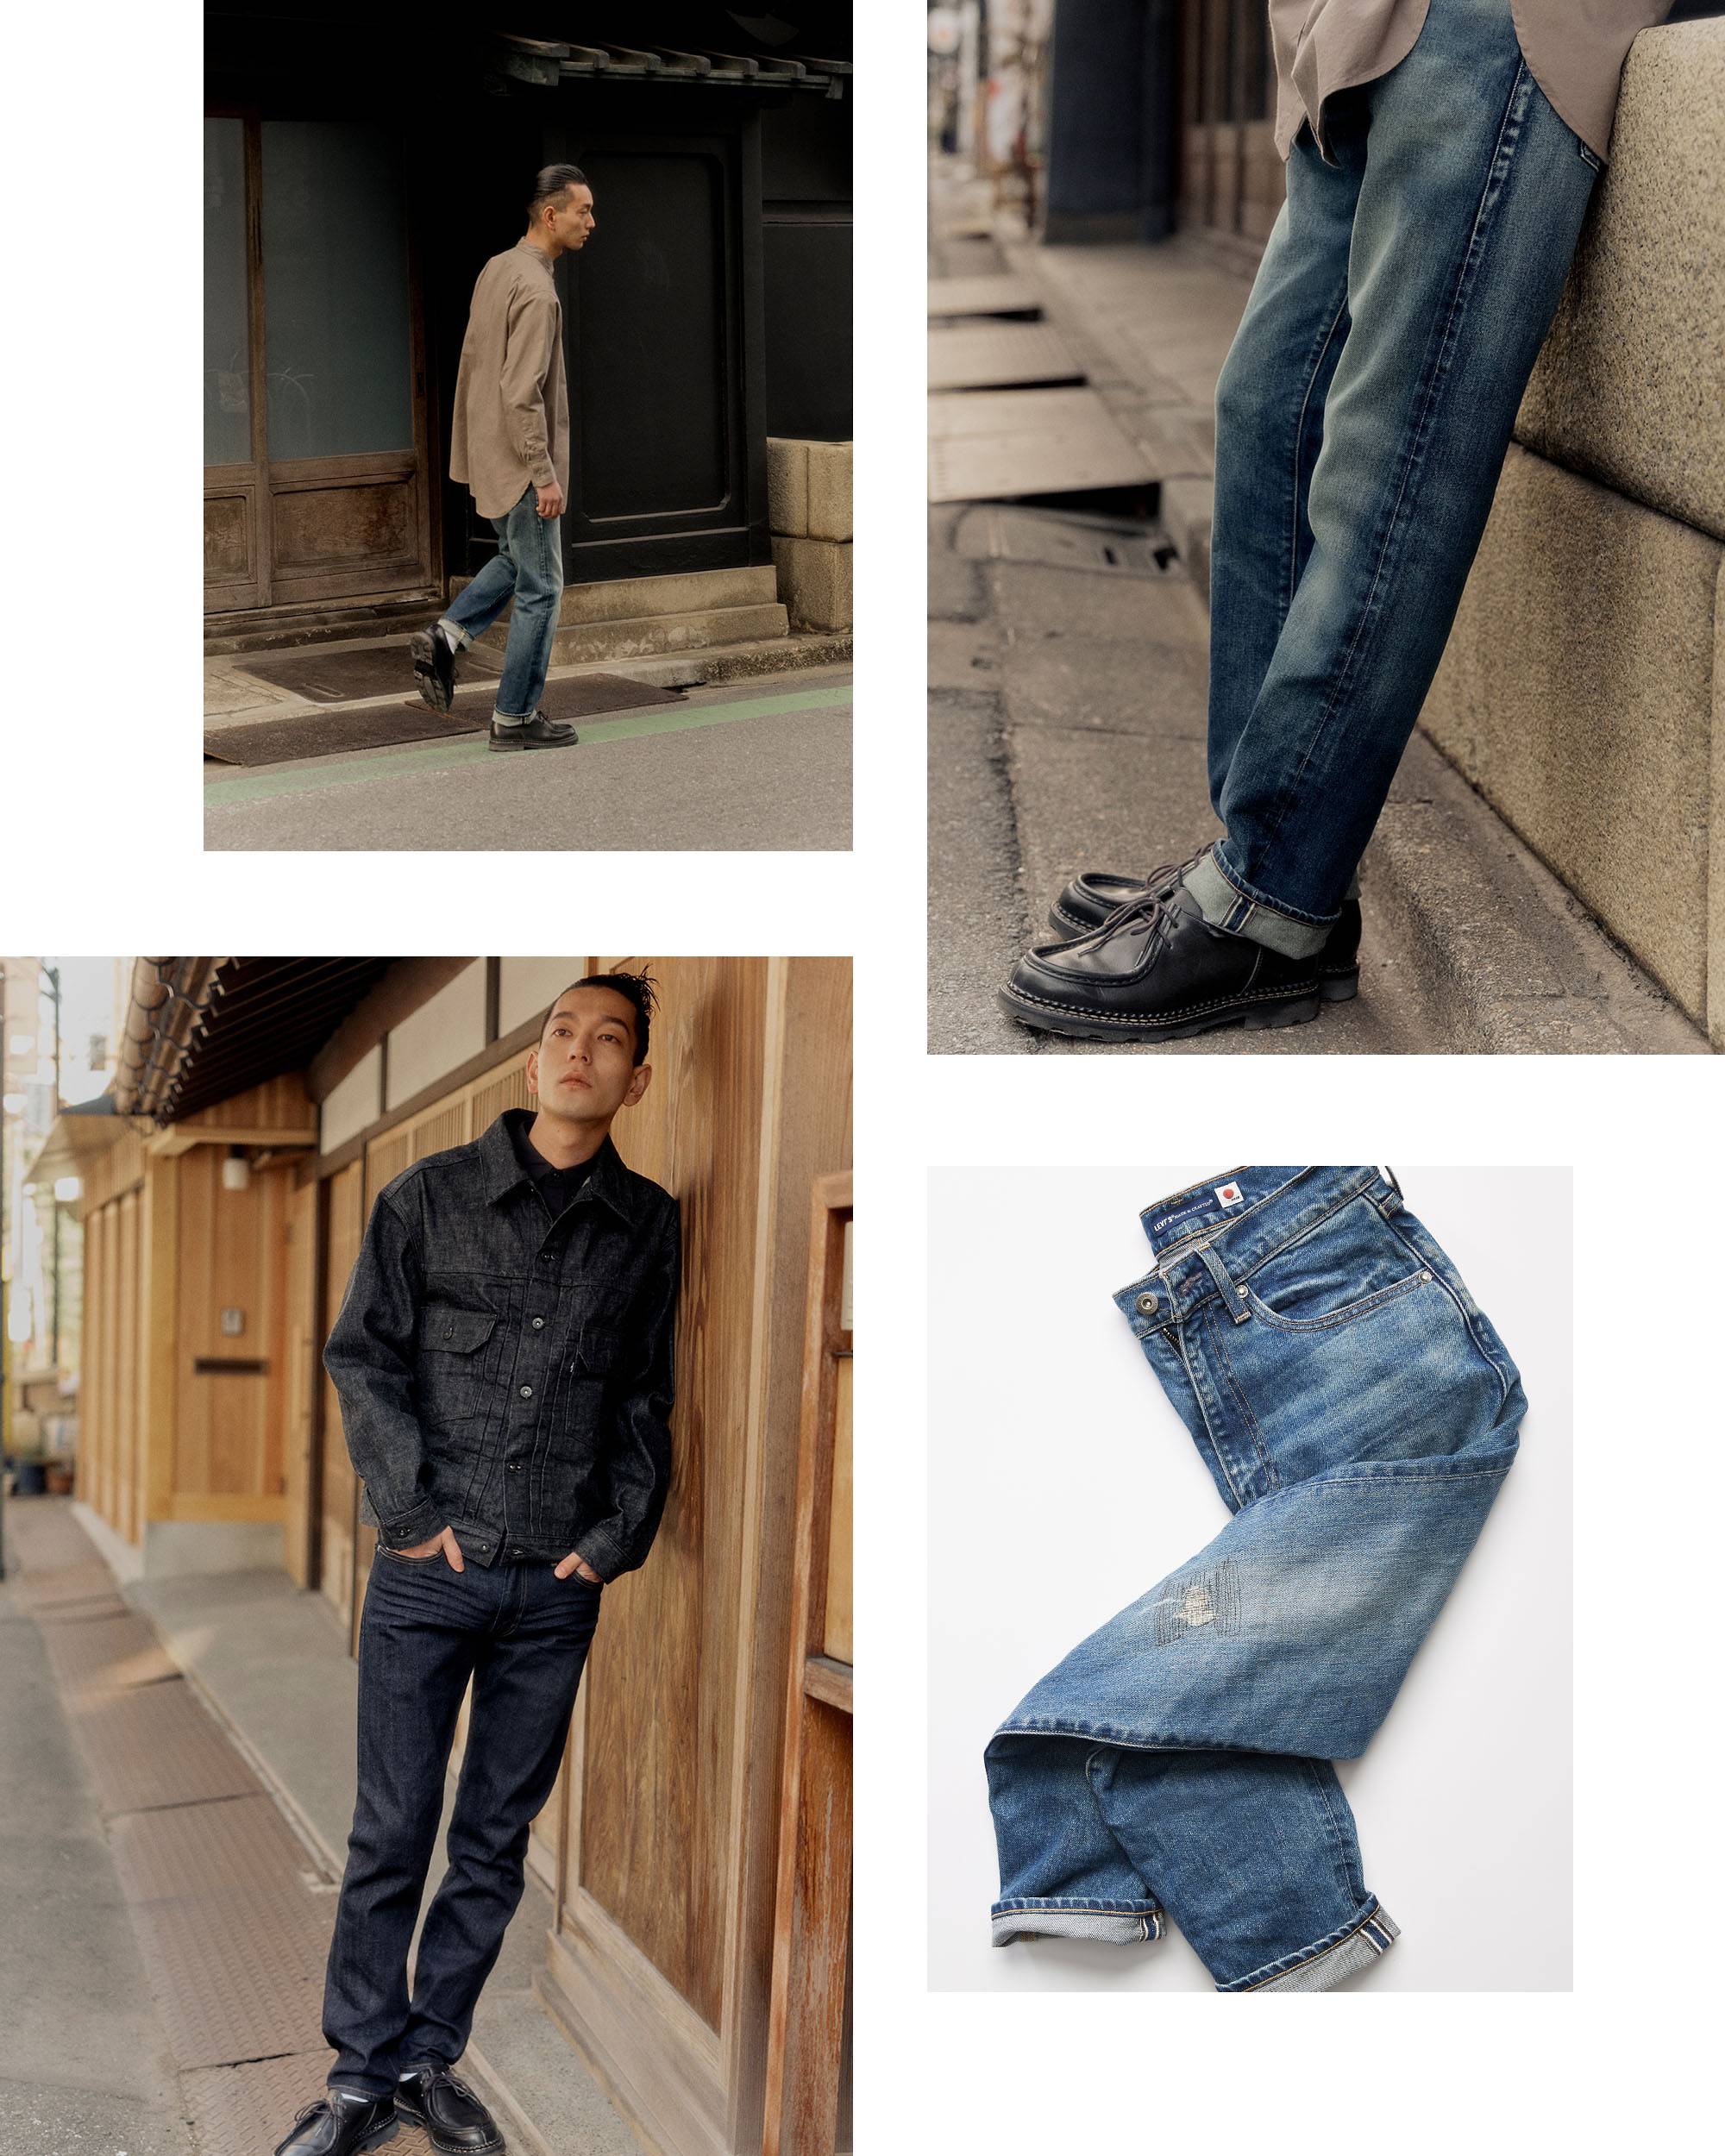 Levis® Made in Japan dark-wash selvedge denim styled on male model in beige button up long sleeve top with tucked in pant legs. He is also styled in a dark grey selvedge denim jacket and dark-wash selvedge jeans.